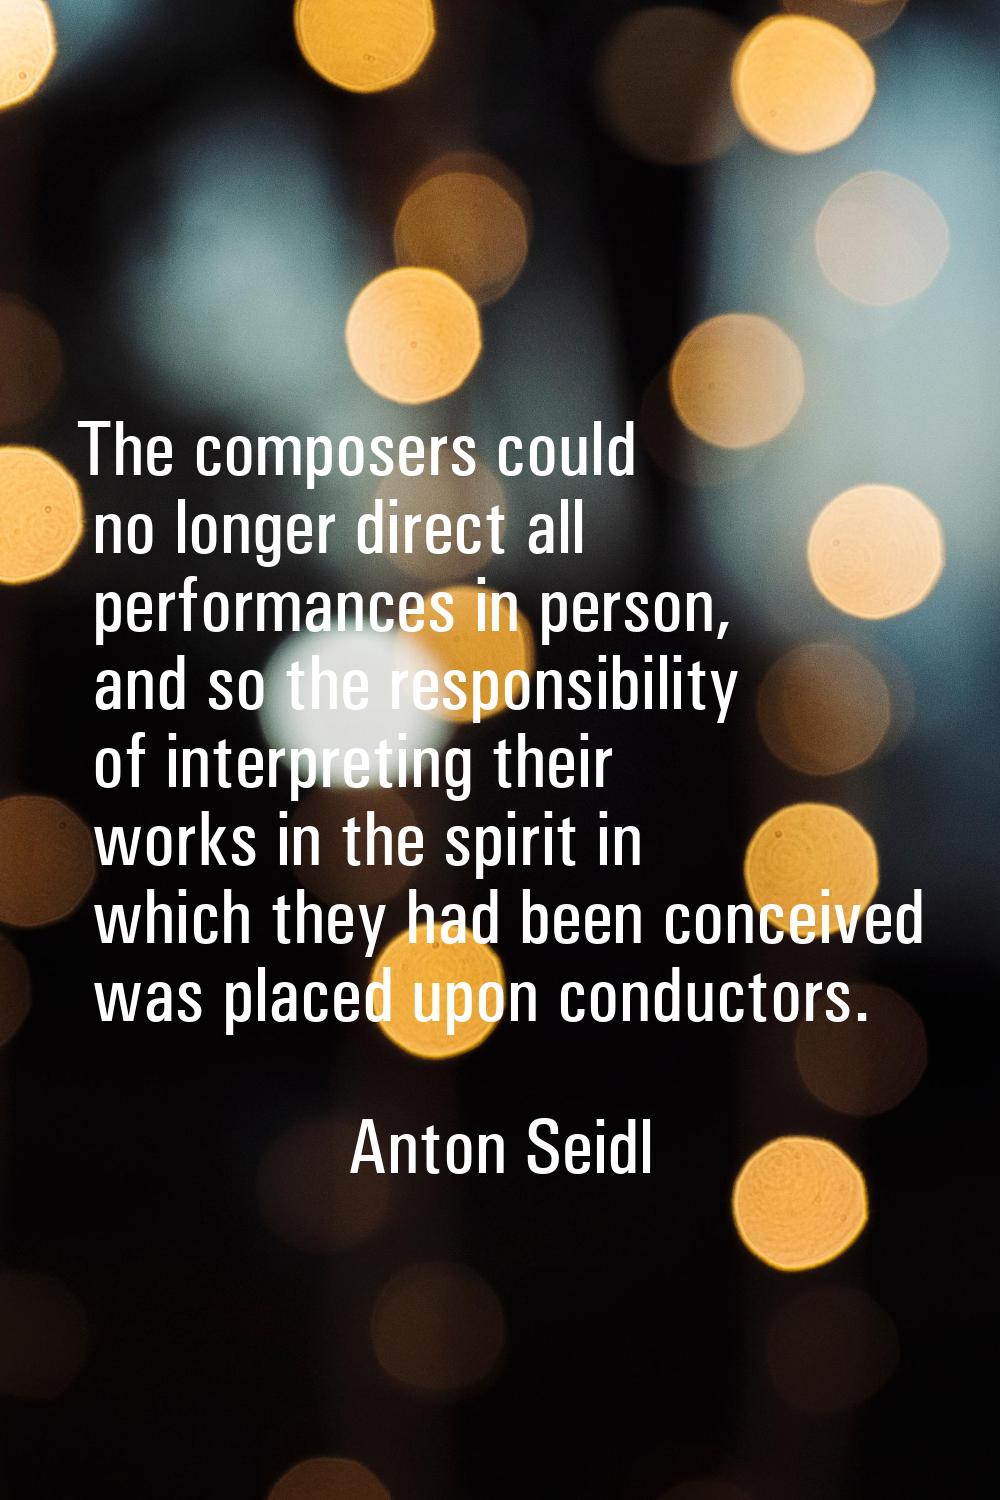 The composers could no longer direct all performances in person, and so the responsibility of inter